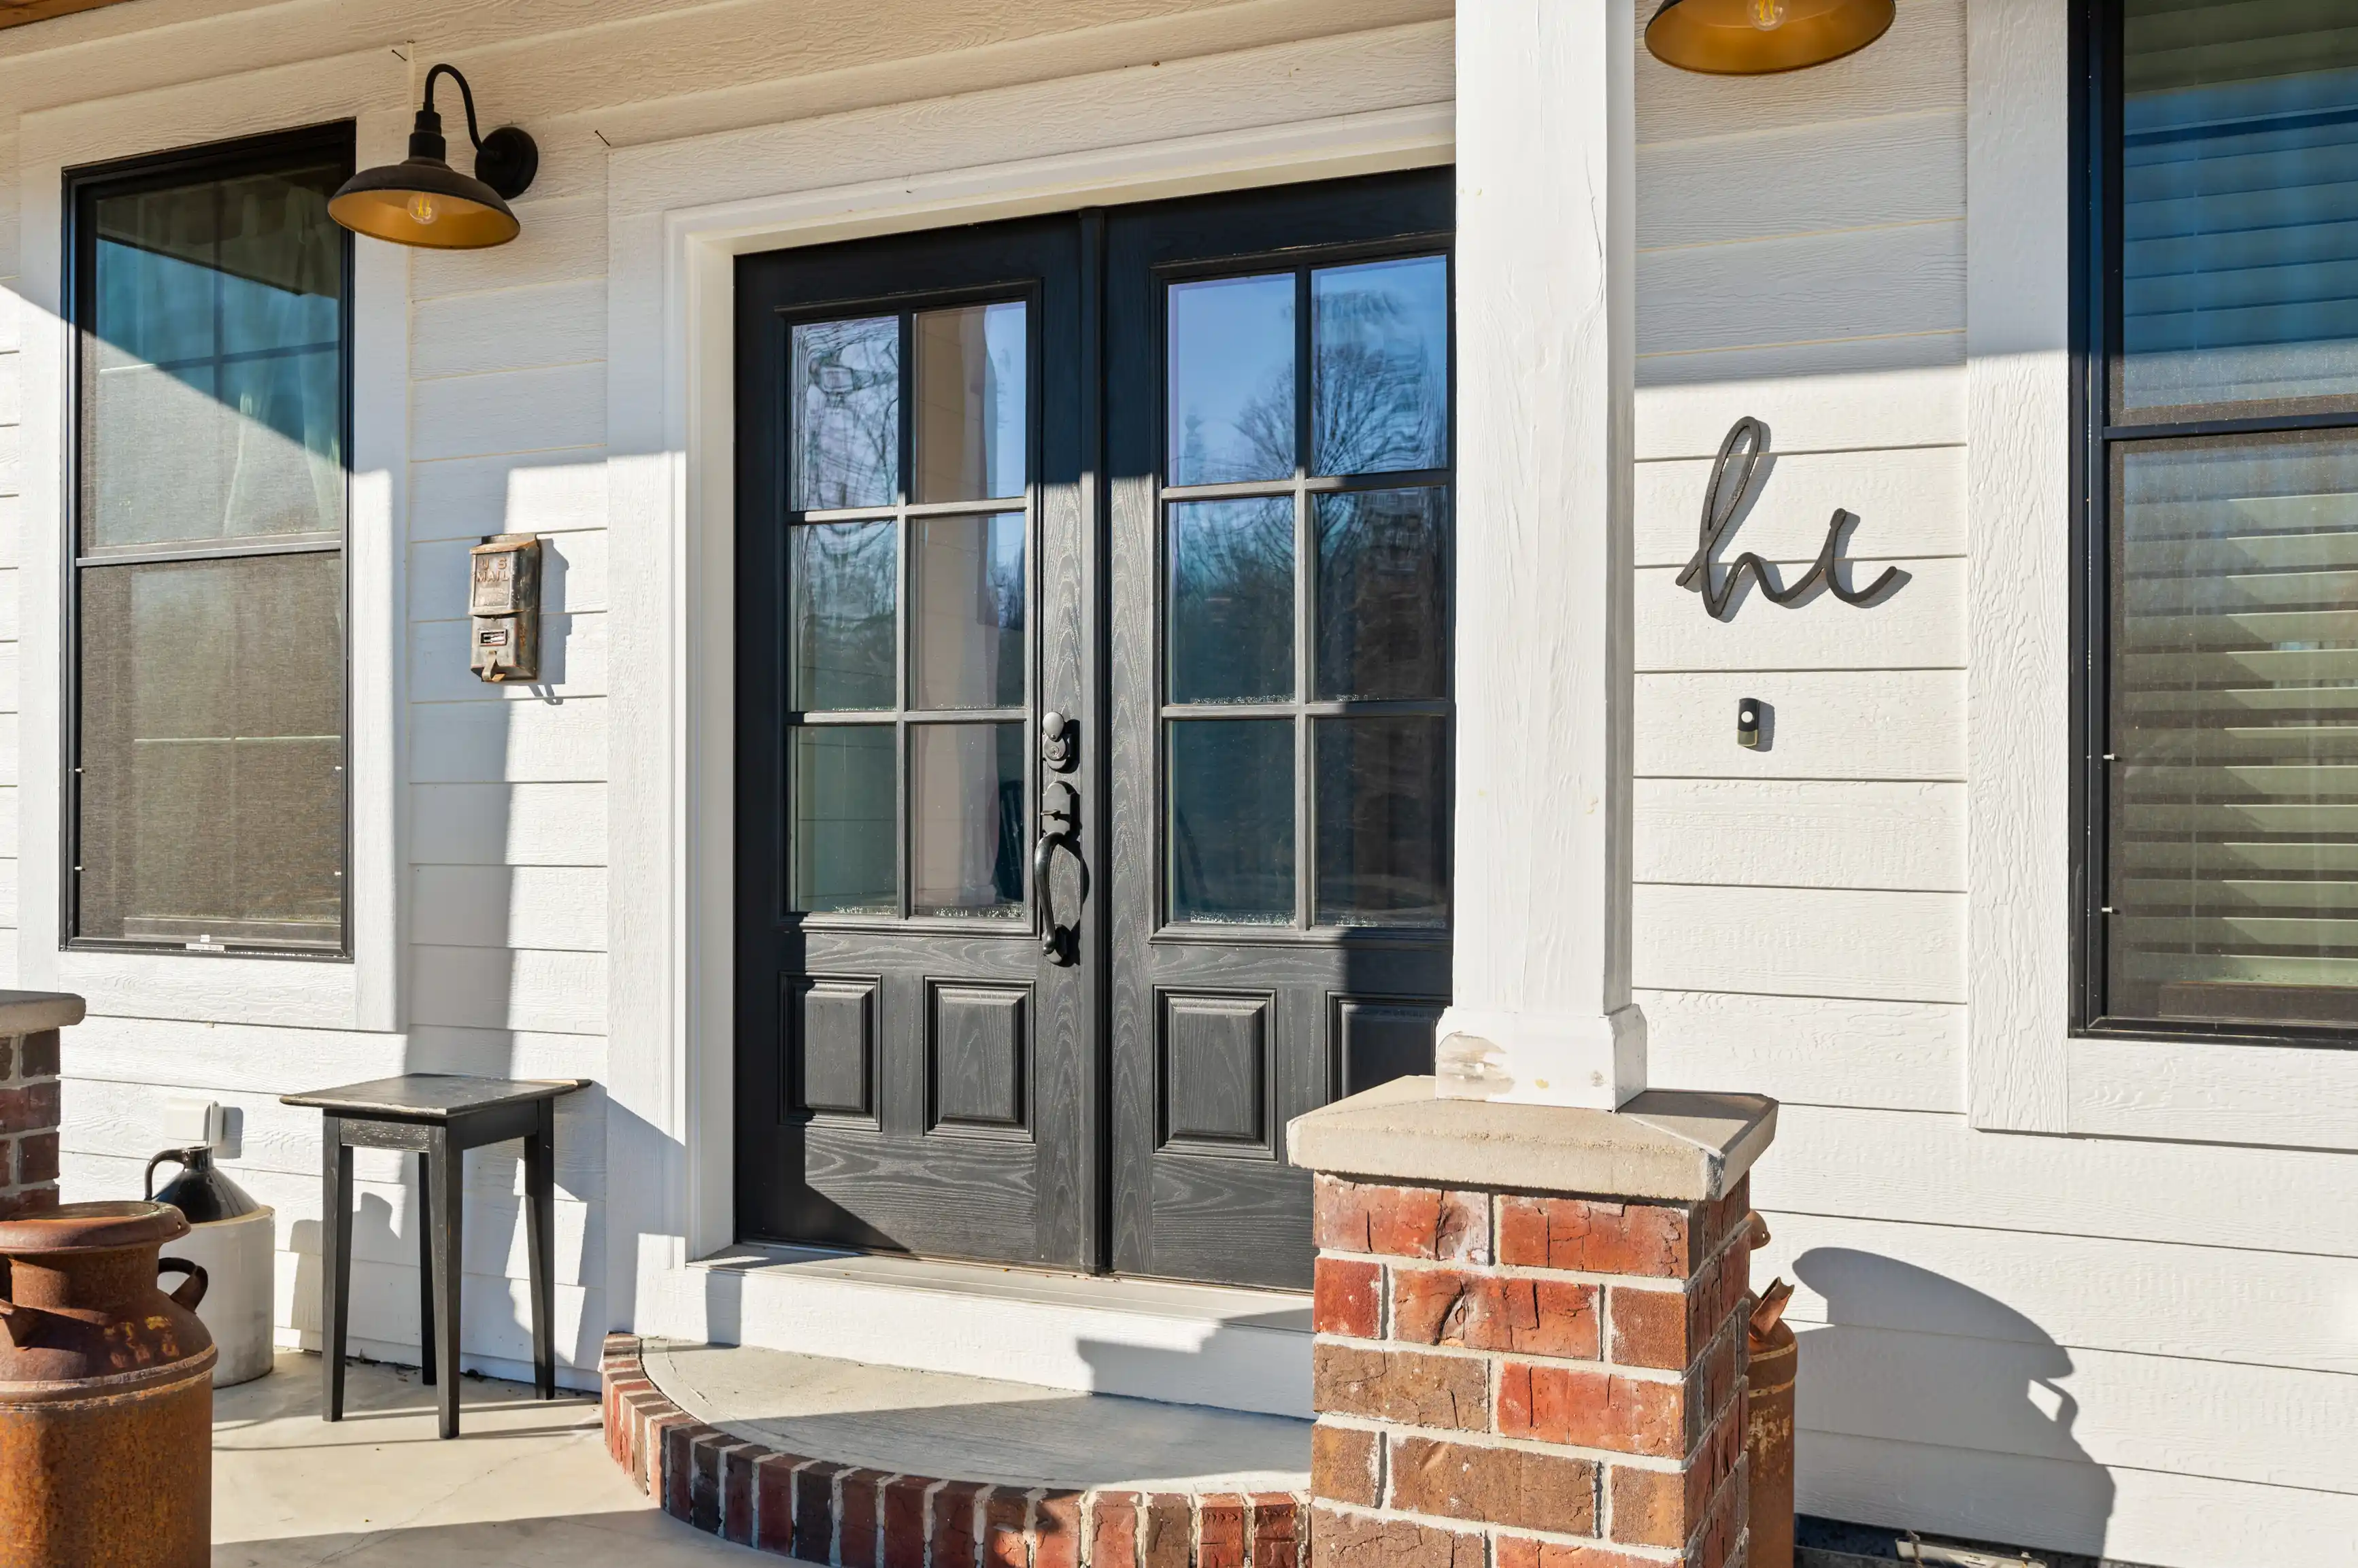 Front porch of a house with black double doors, side windows, and "hi" sign, with a rustic lamp above and a white wall.